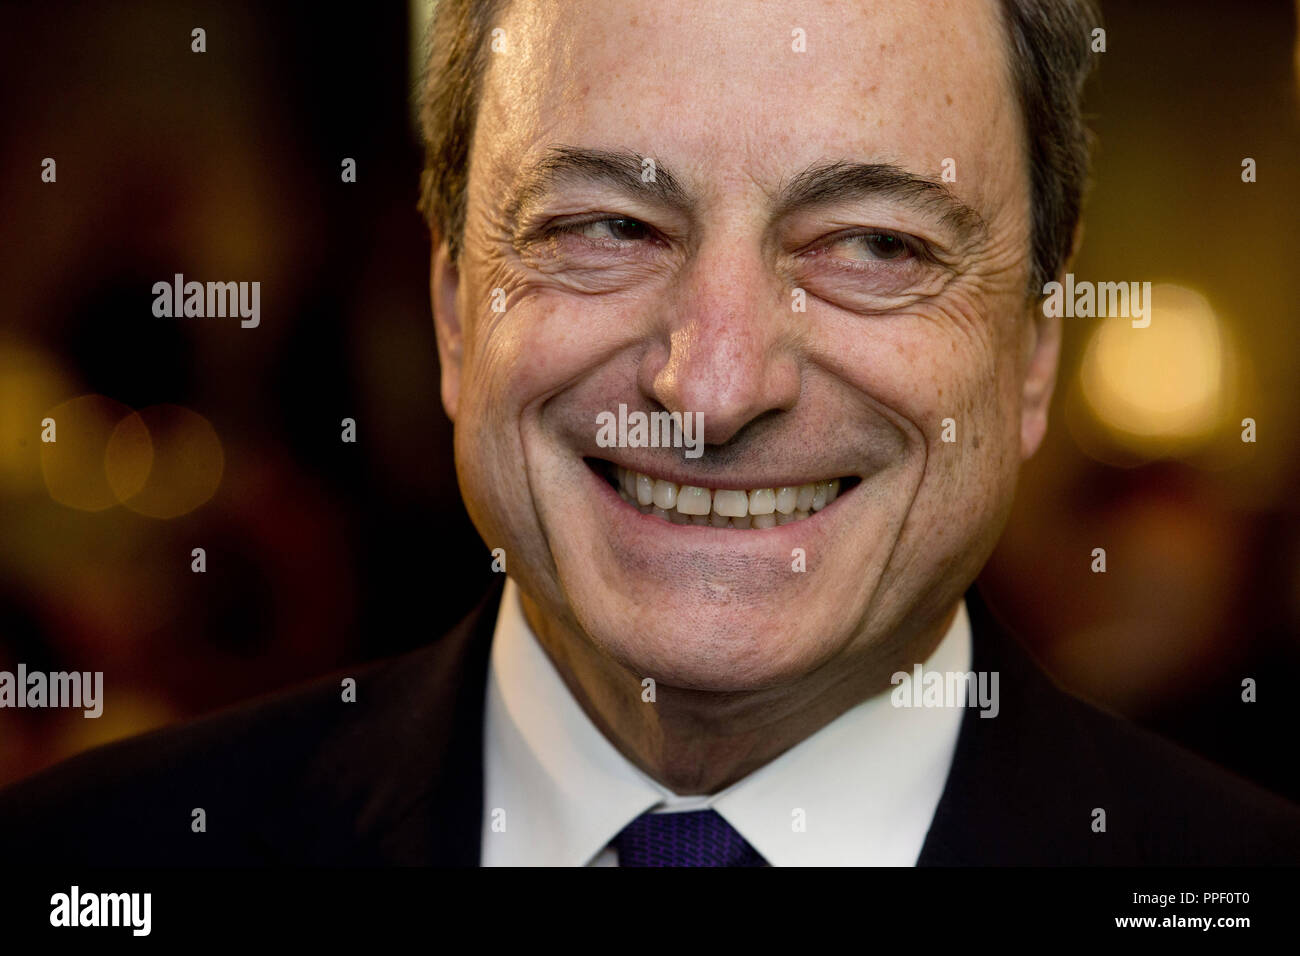 Mario Draghi, President of the European Central Bank (ECB), on the Finance Day of the Sueddeutsche Zeitung in Frankfurt am Main. Stock Photo